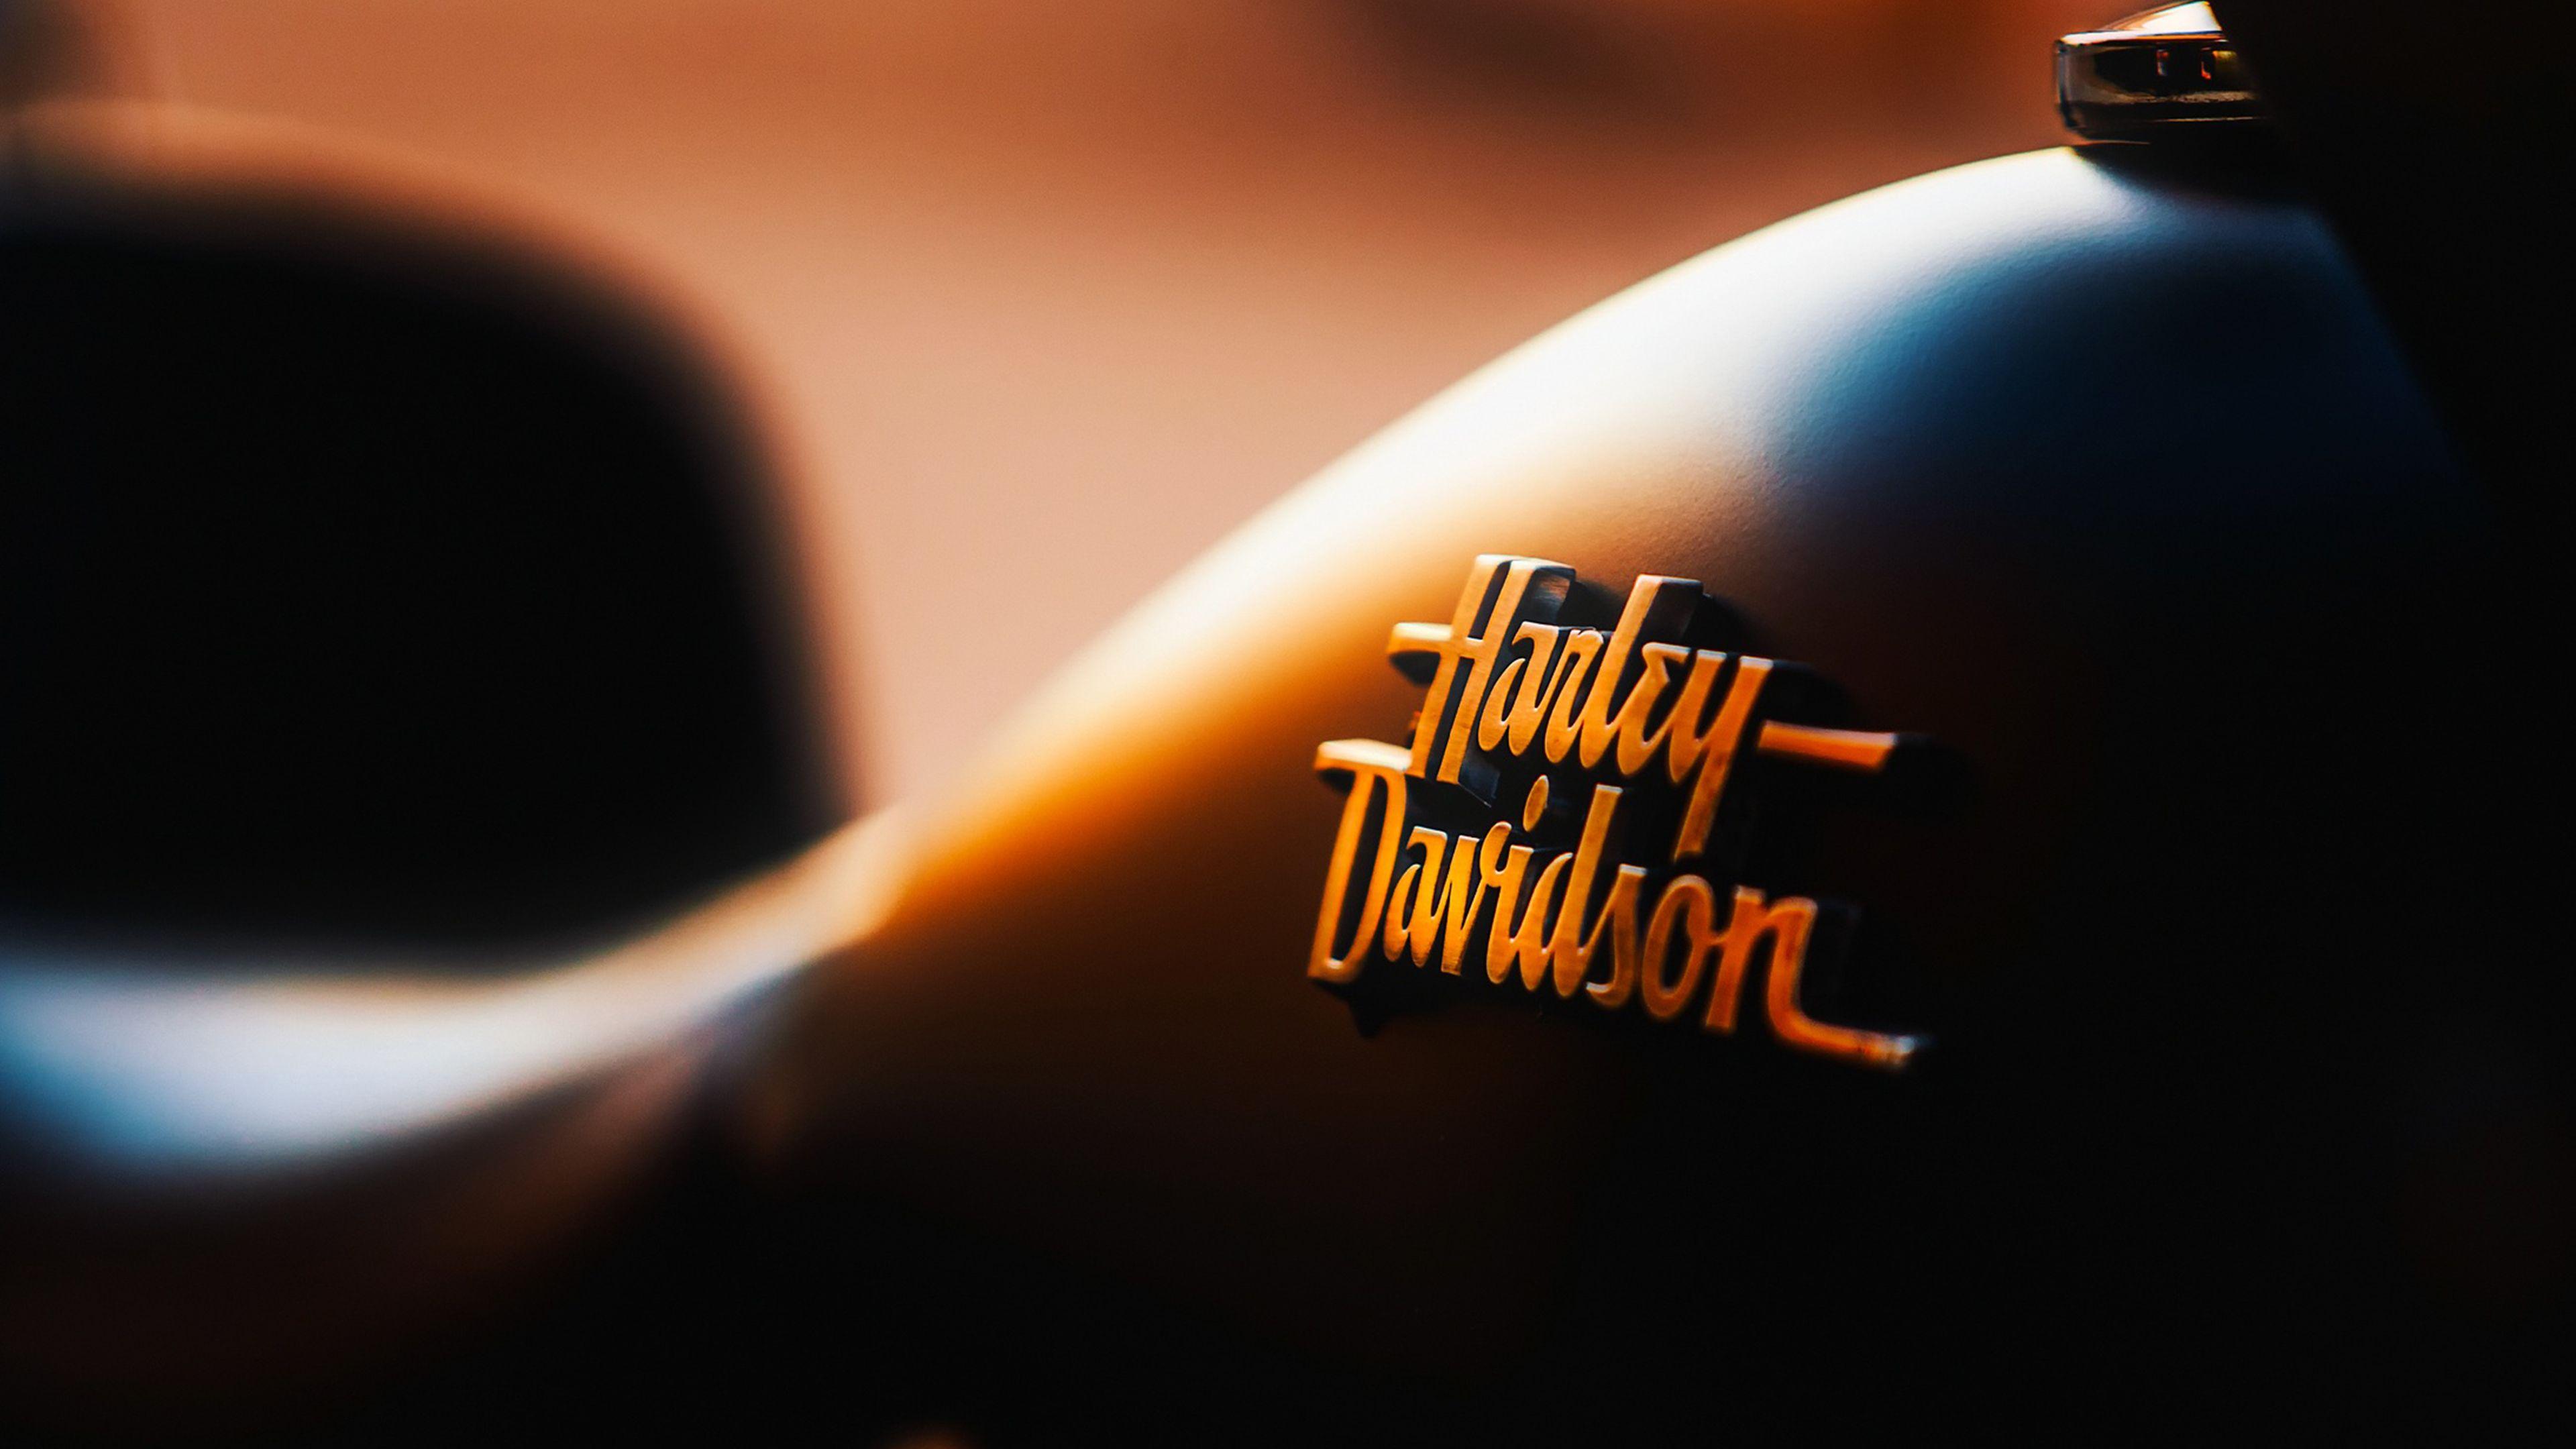 Free Harley Davidson ChromeBook Wallpaper Ready For Download